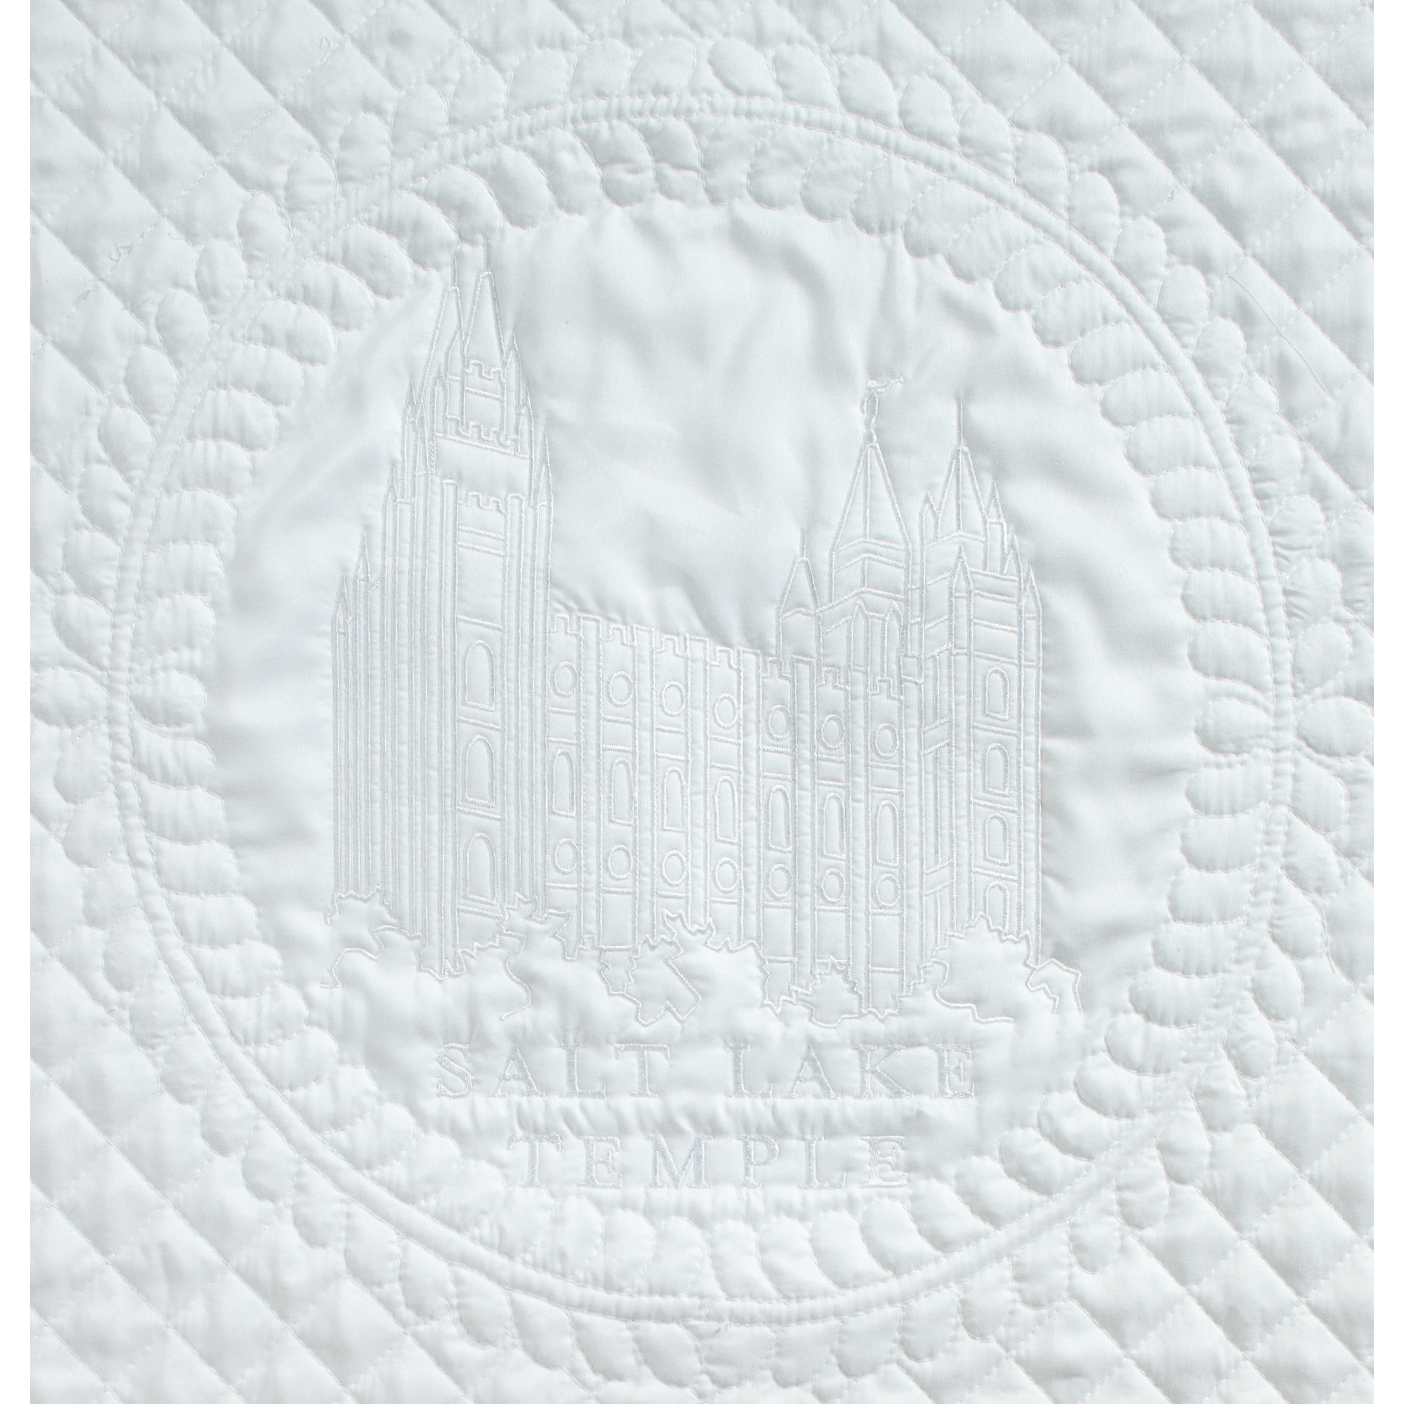 The Salt Lake Temple embroidered on fabric.